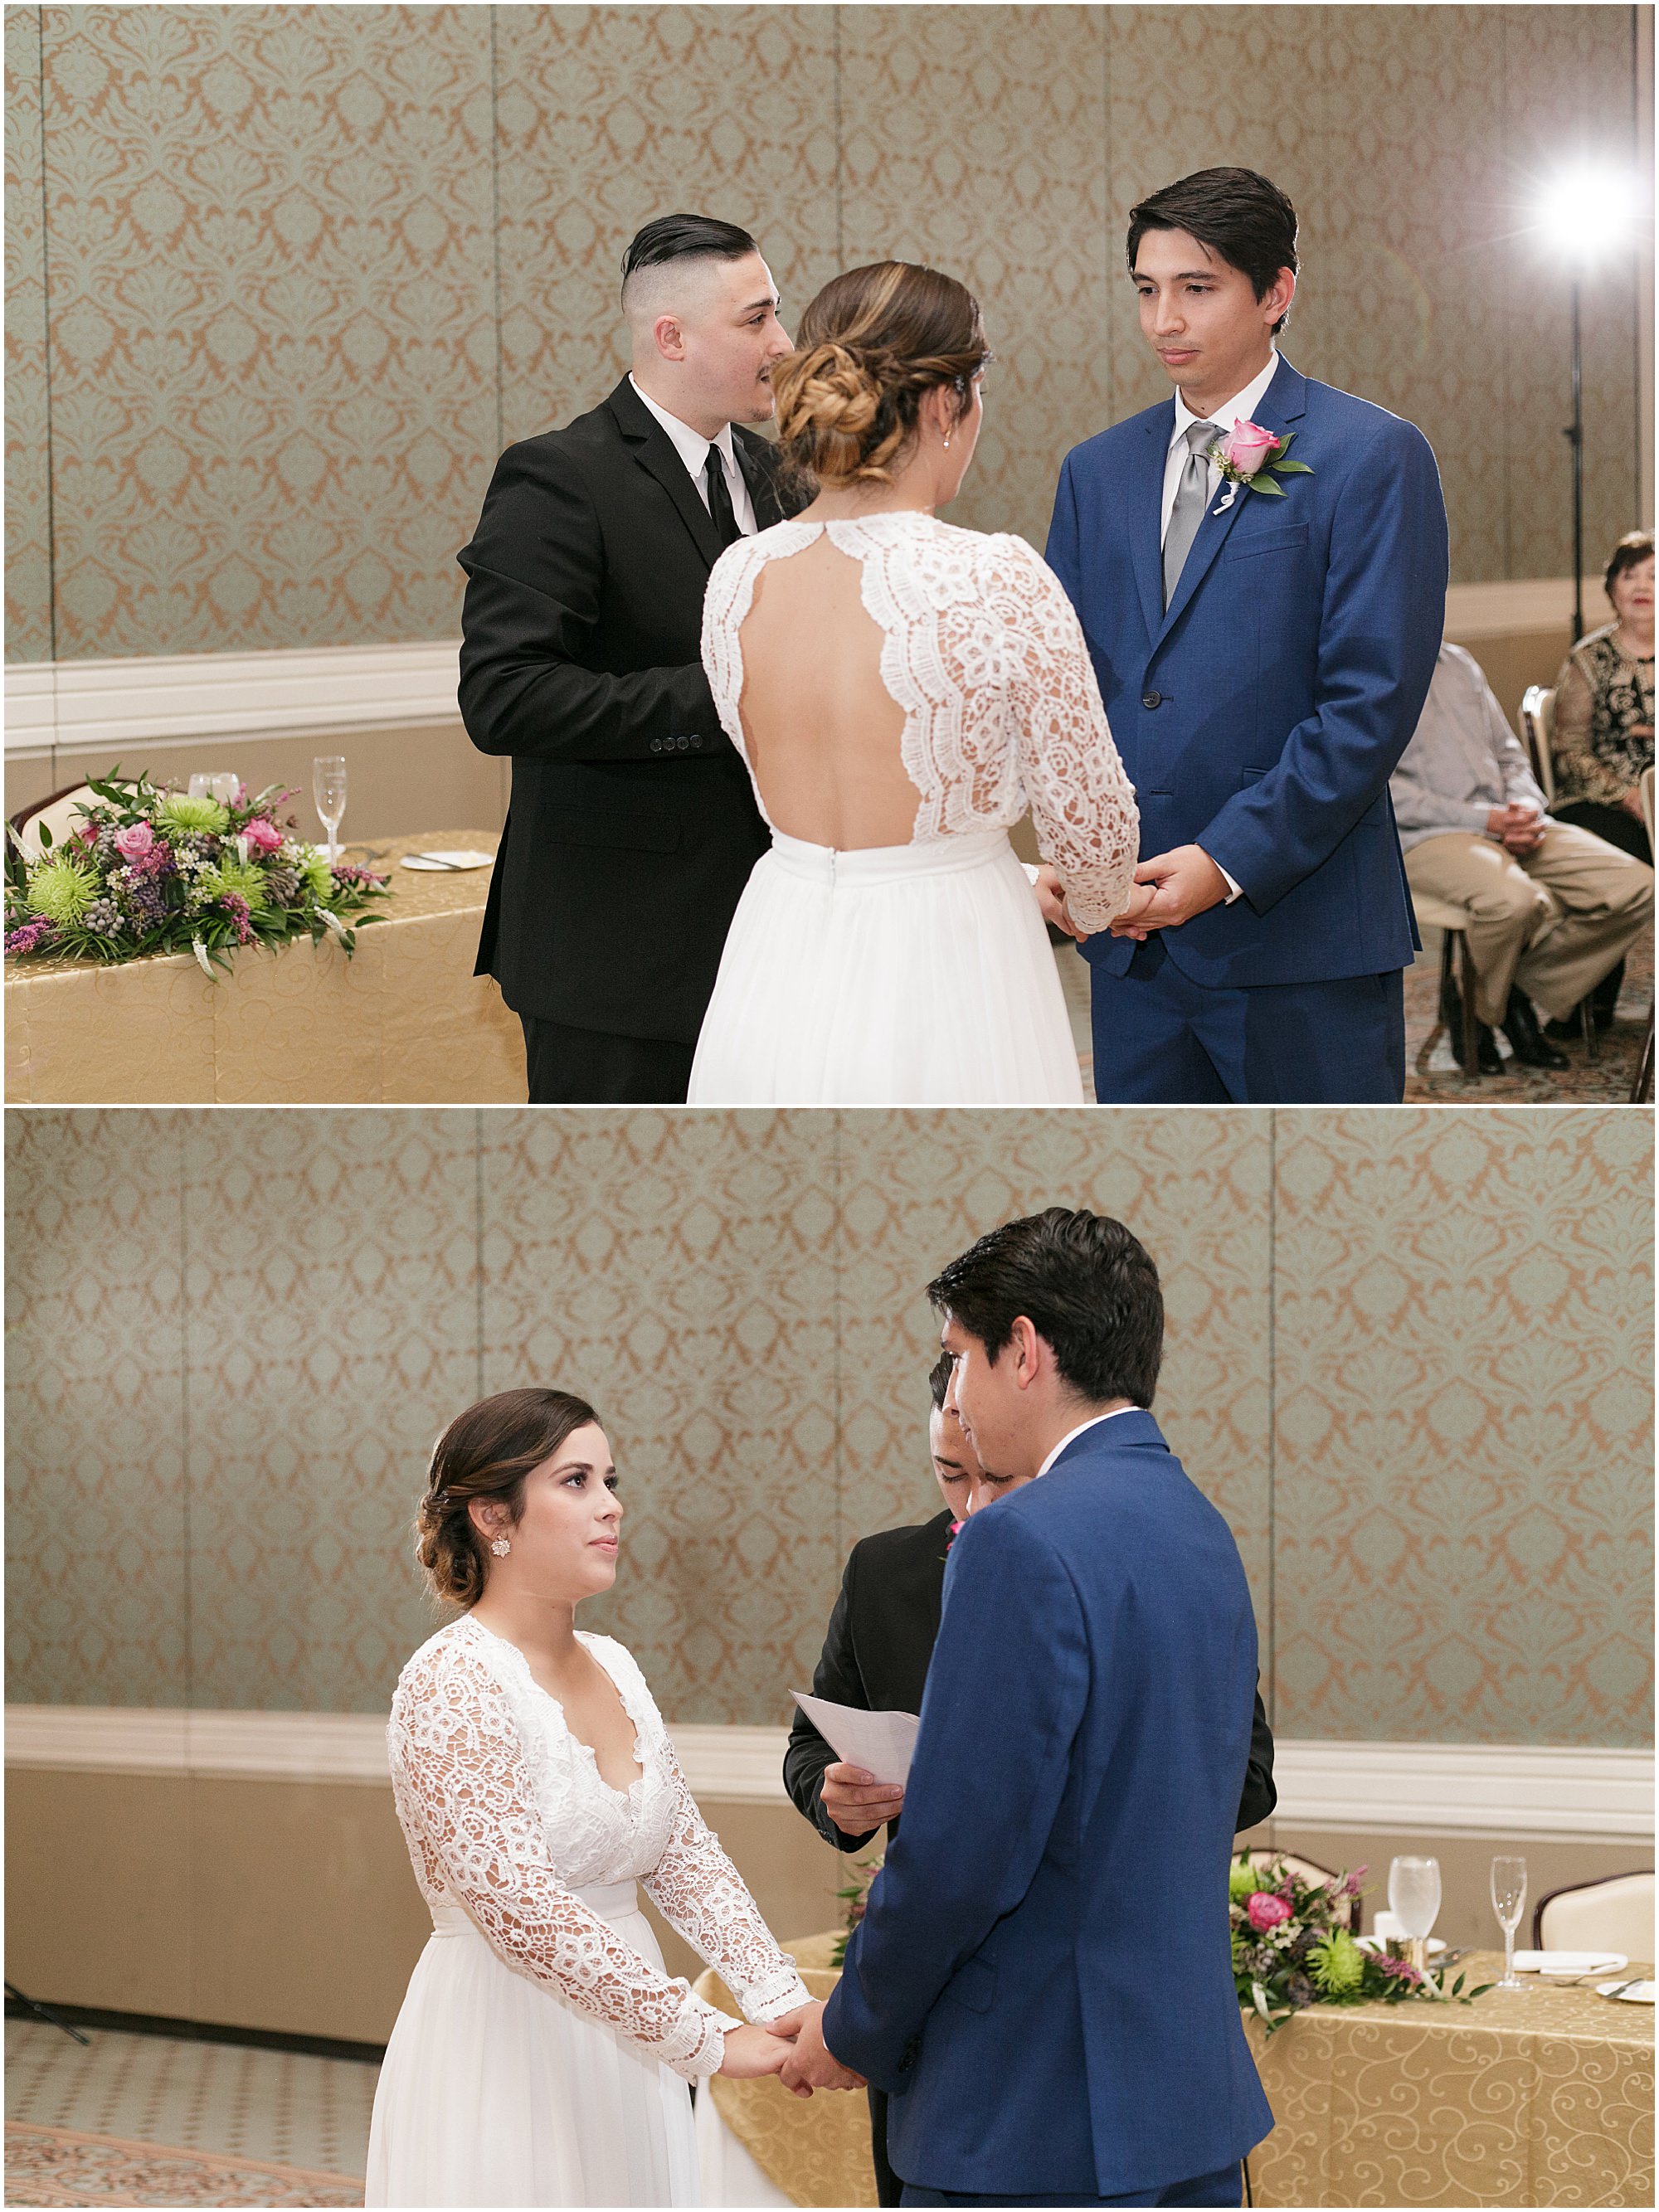 Couple exchange vows at their wedding